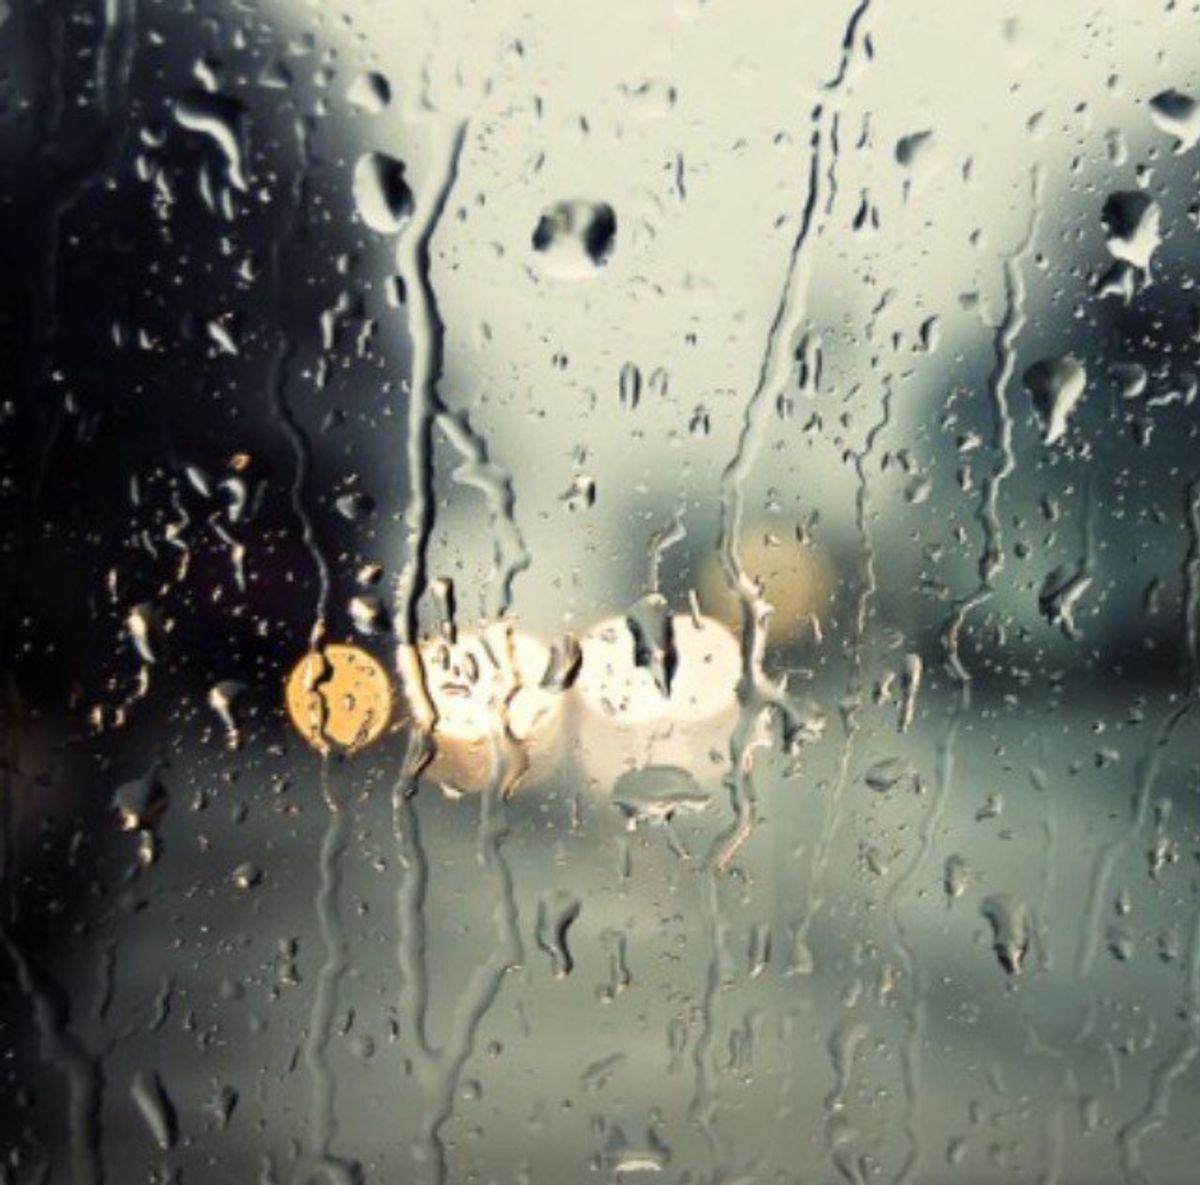 26 Things To Do On A Rainy Day